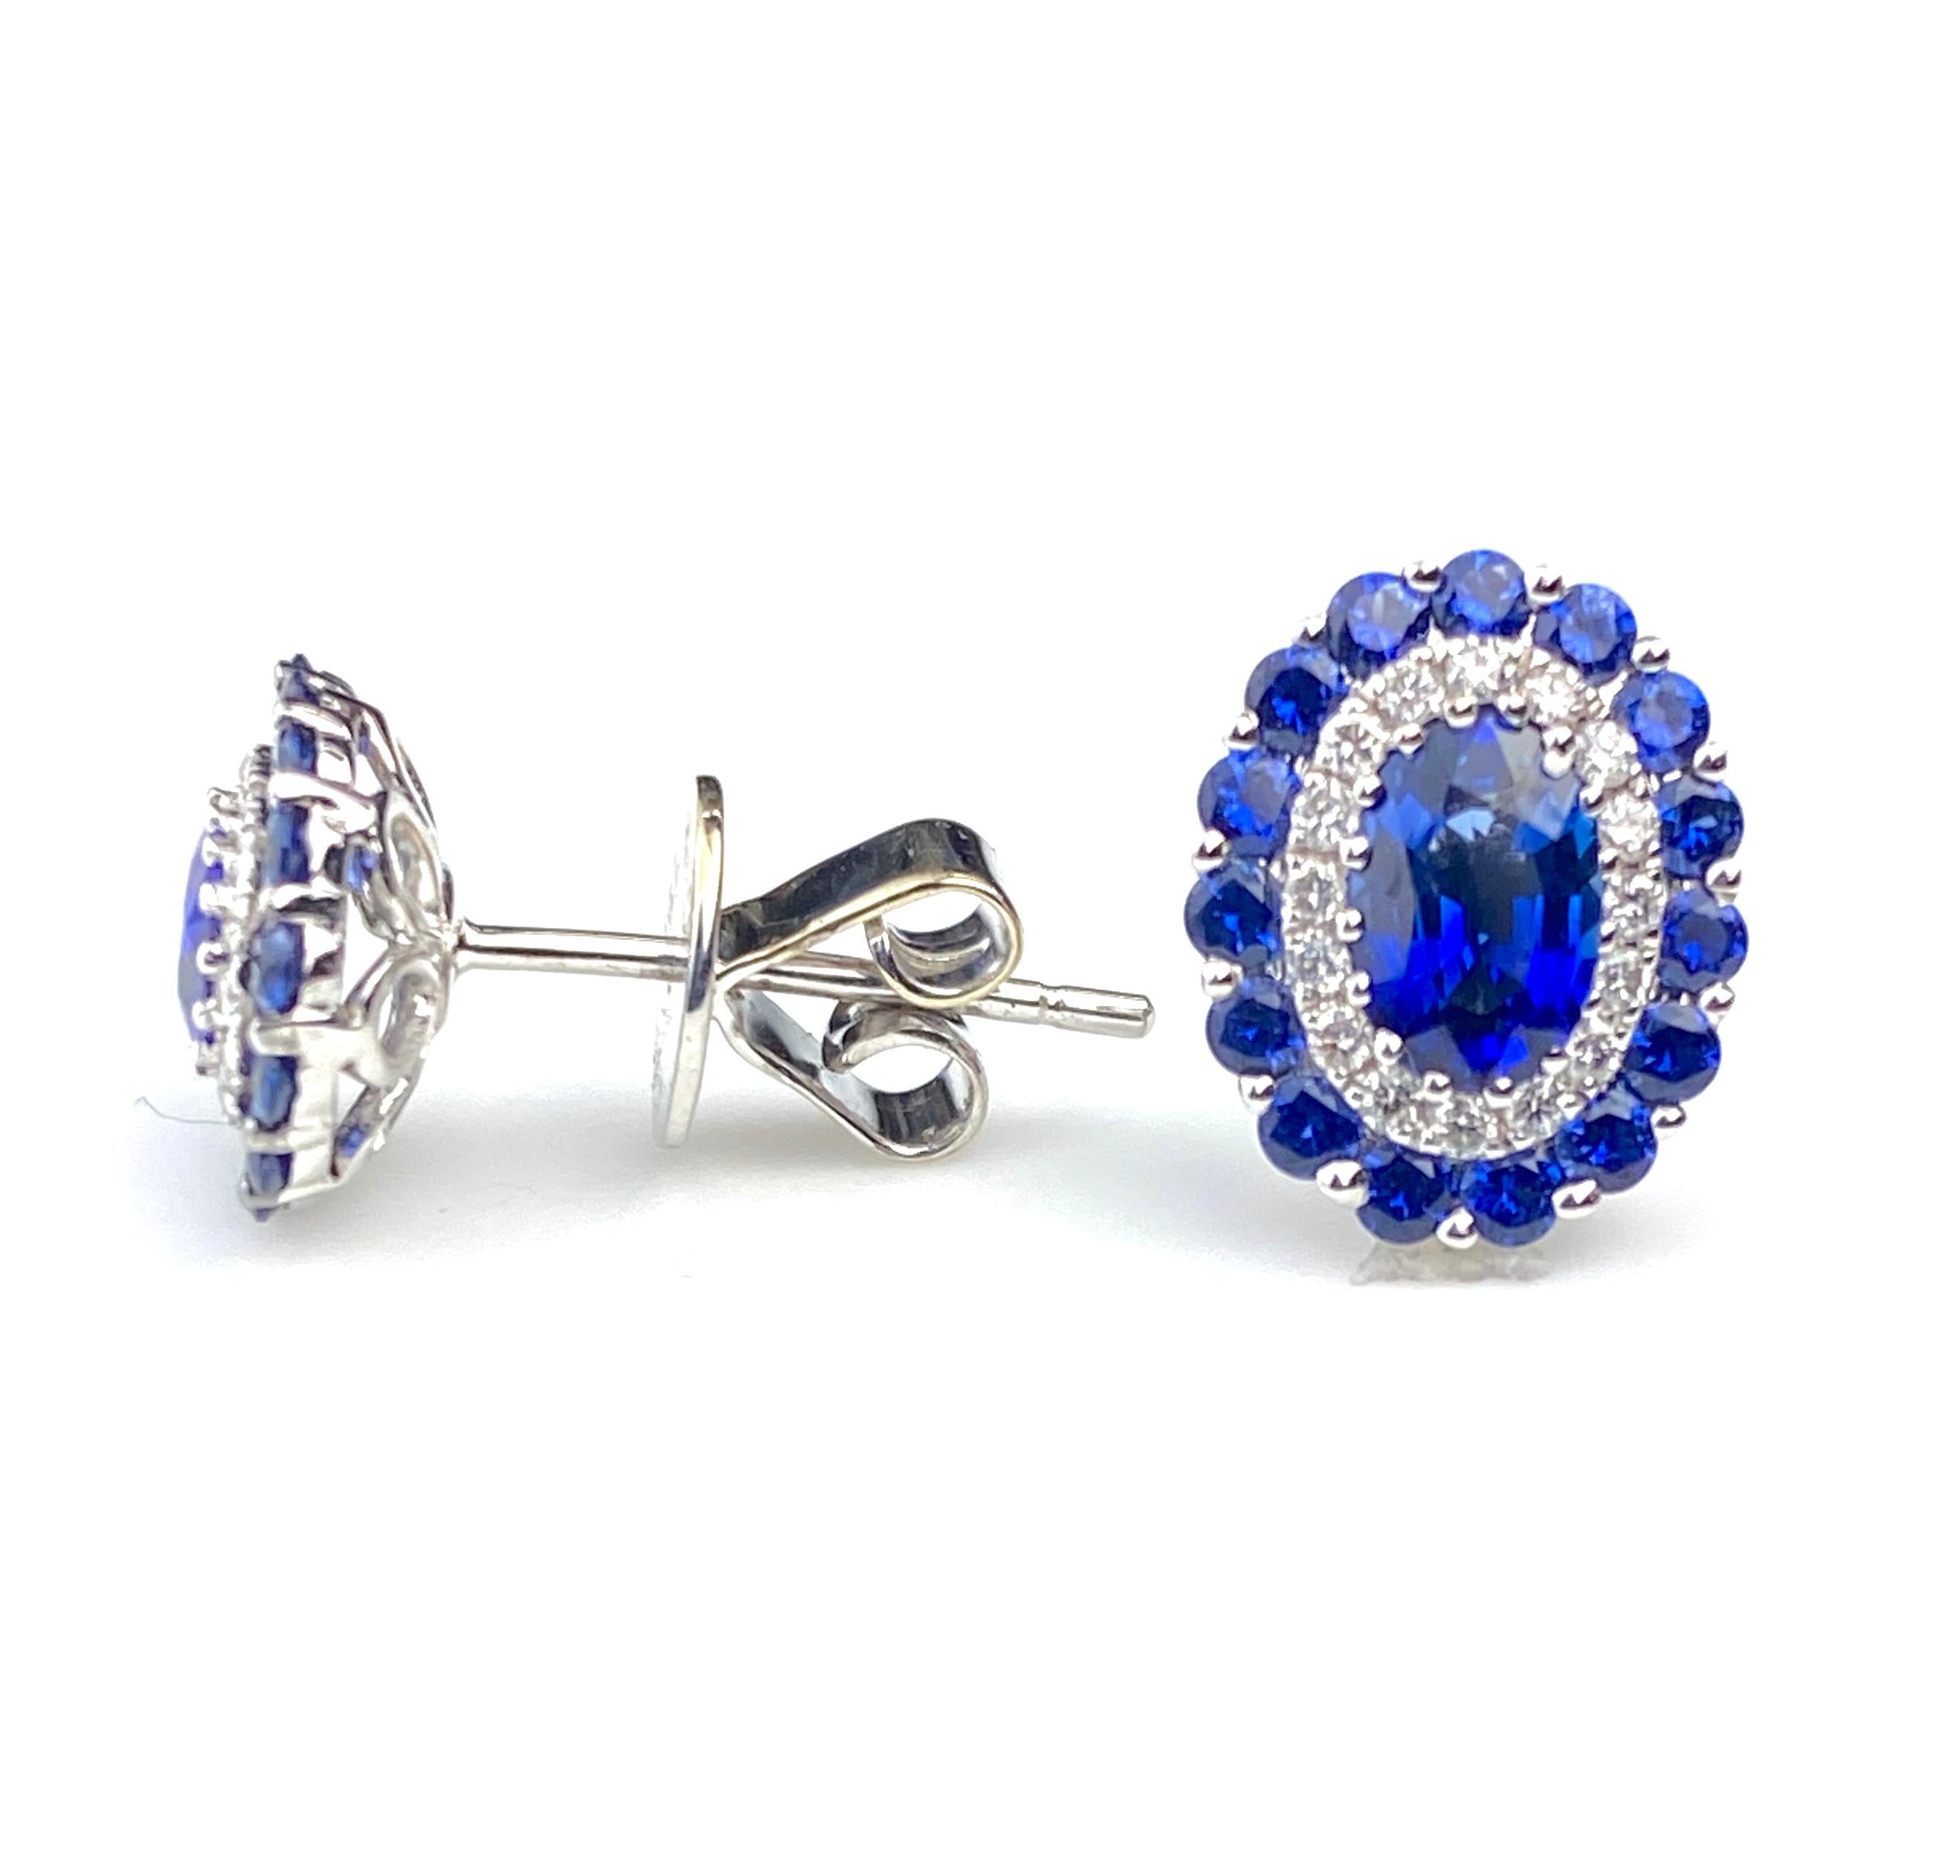 Oval cut blue sapphire gems surrounded by consecutive halo's of white diamonds and blue sapphires.  Comprising 1.85ct total of blue sapphires and 0.19ct total of diamonds. Set in 18kt white gold stud setting with medium backing. 